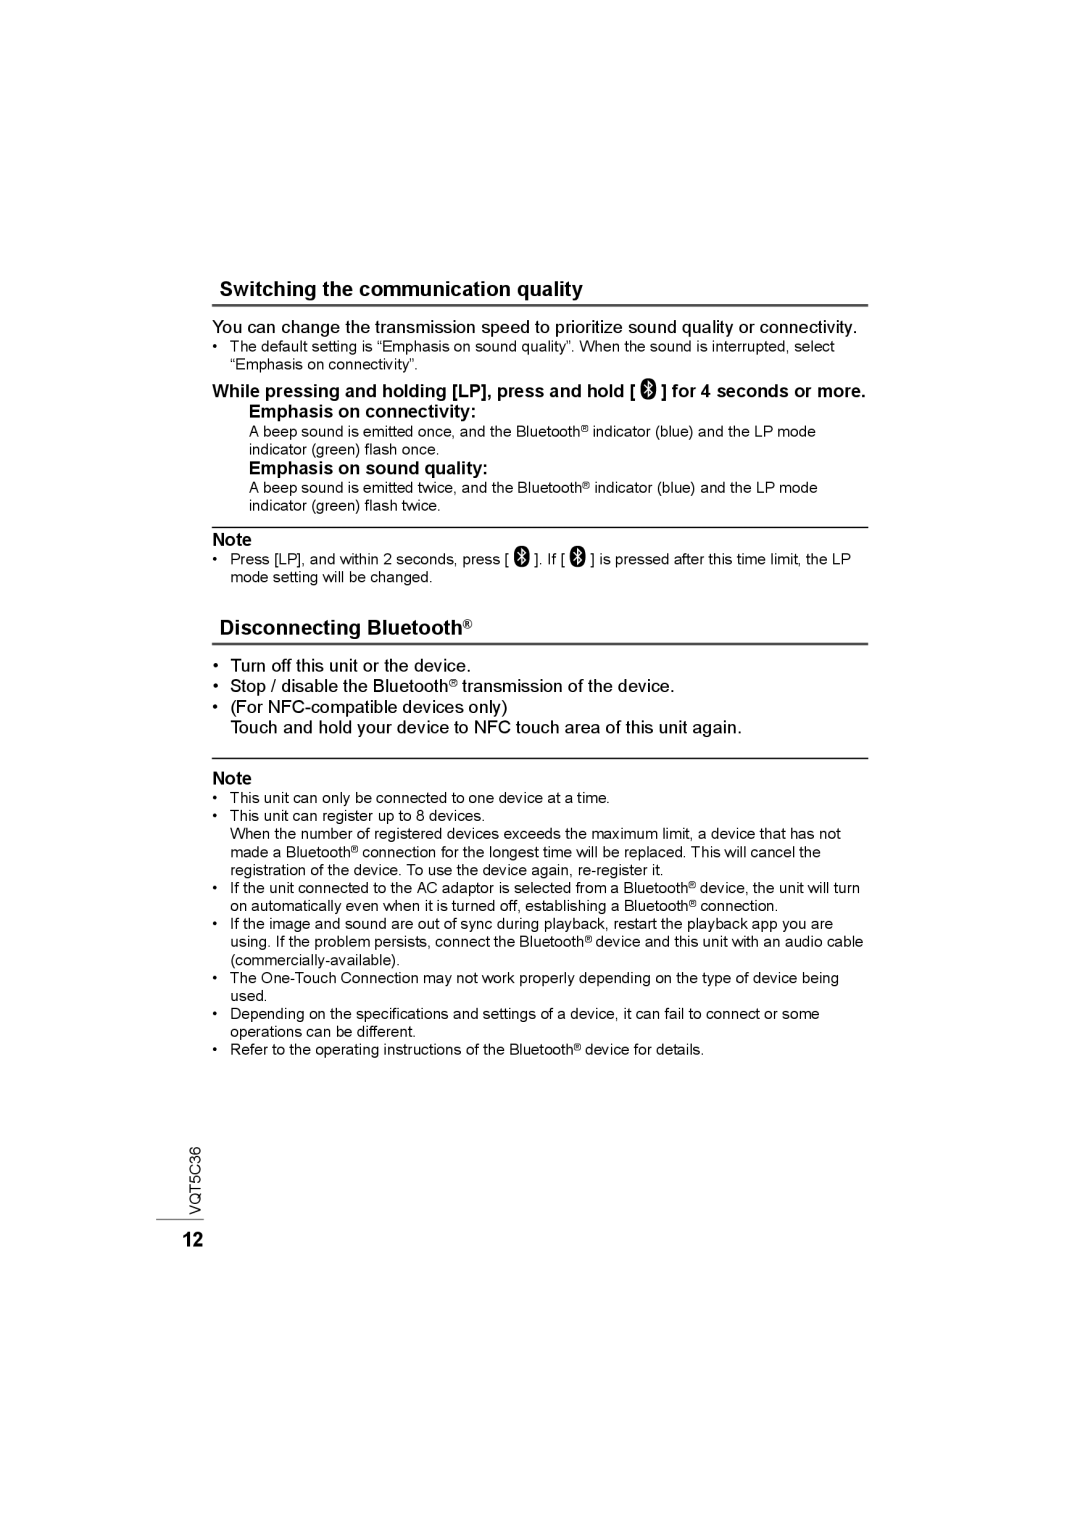 Panasonic SC-NA30 owner manual Switching the communication quality, Disconnecting Bluetooth, Emphasis on sound quality 